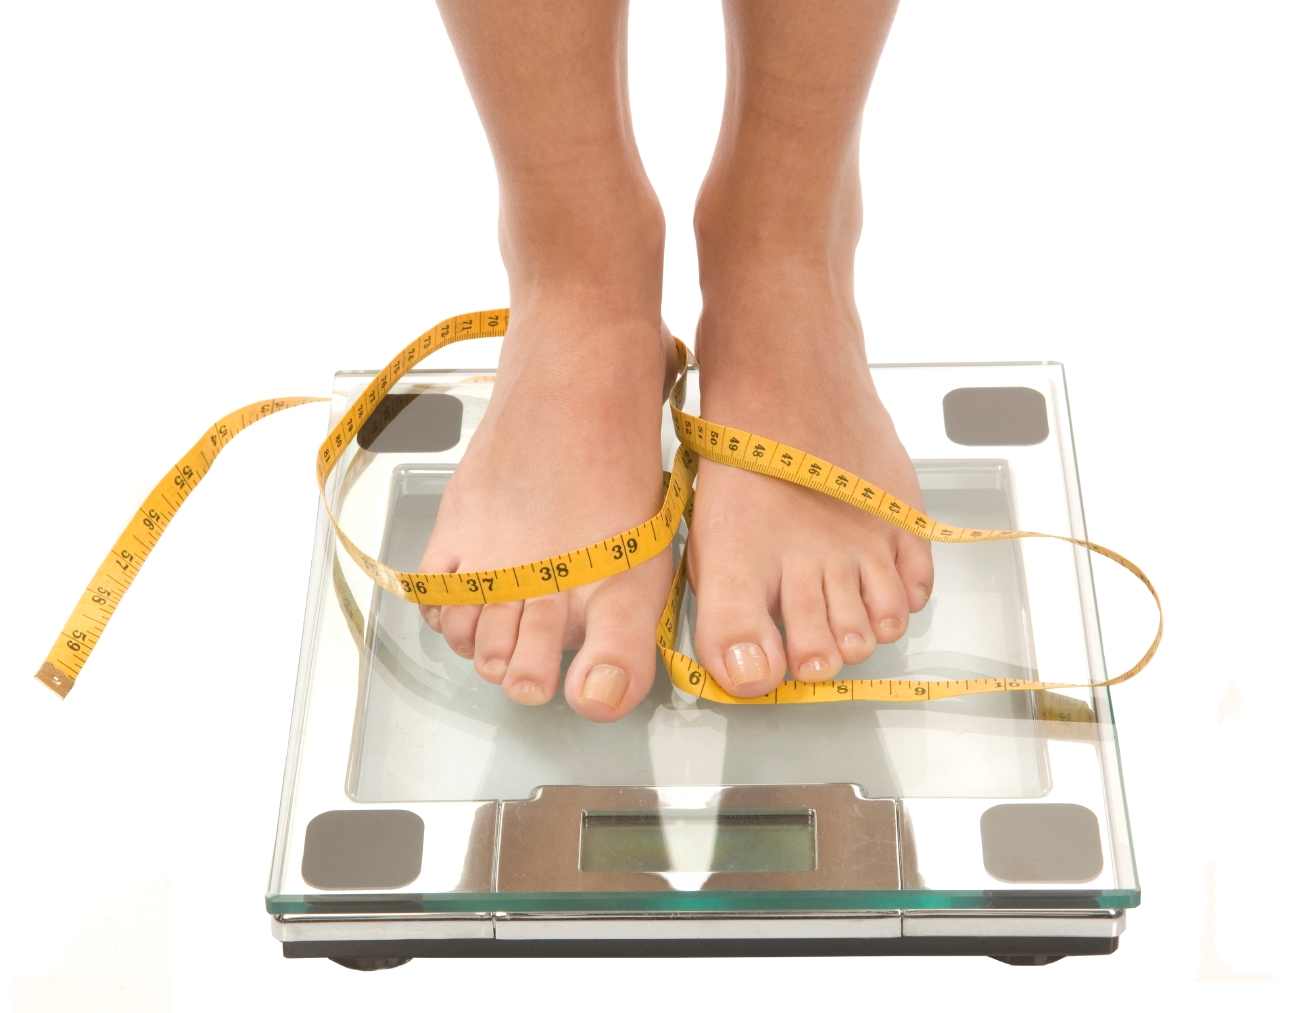 Prepping For New Years: How To Naturally Lose Weight and Keep it Off